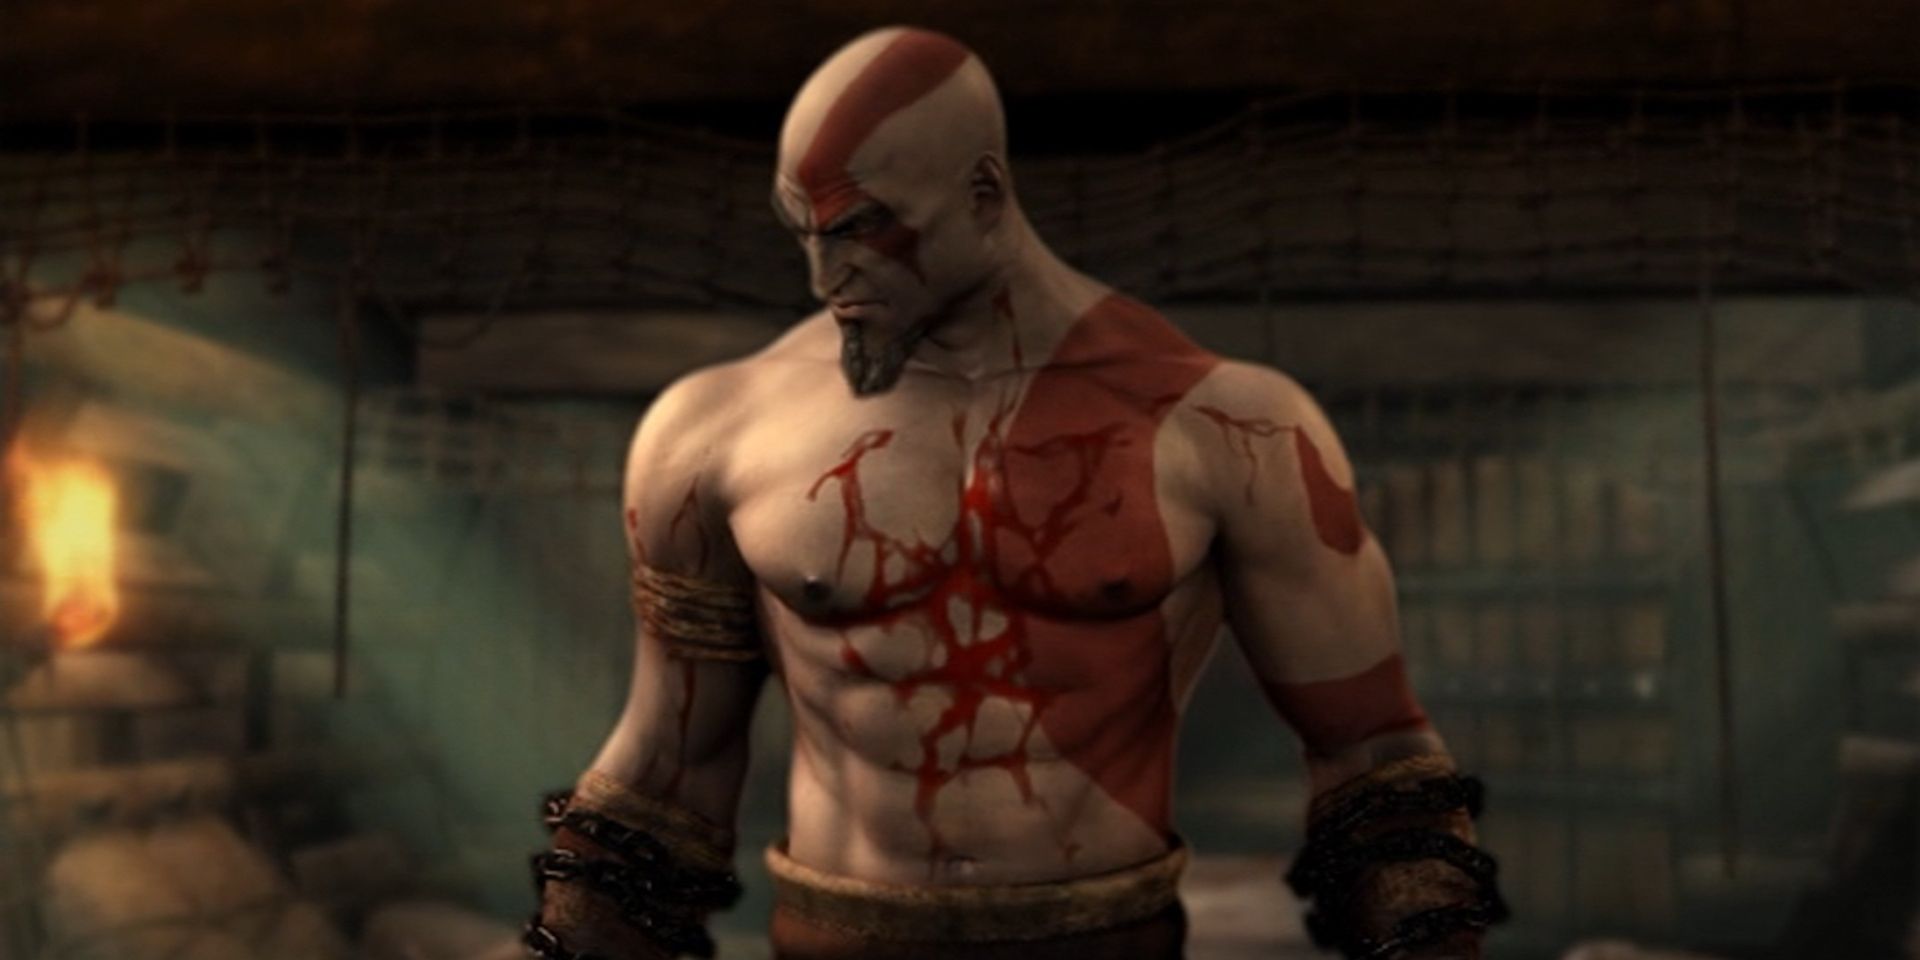 Kratos covered in blood in the original God of War